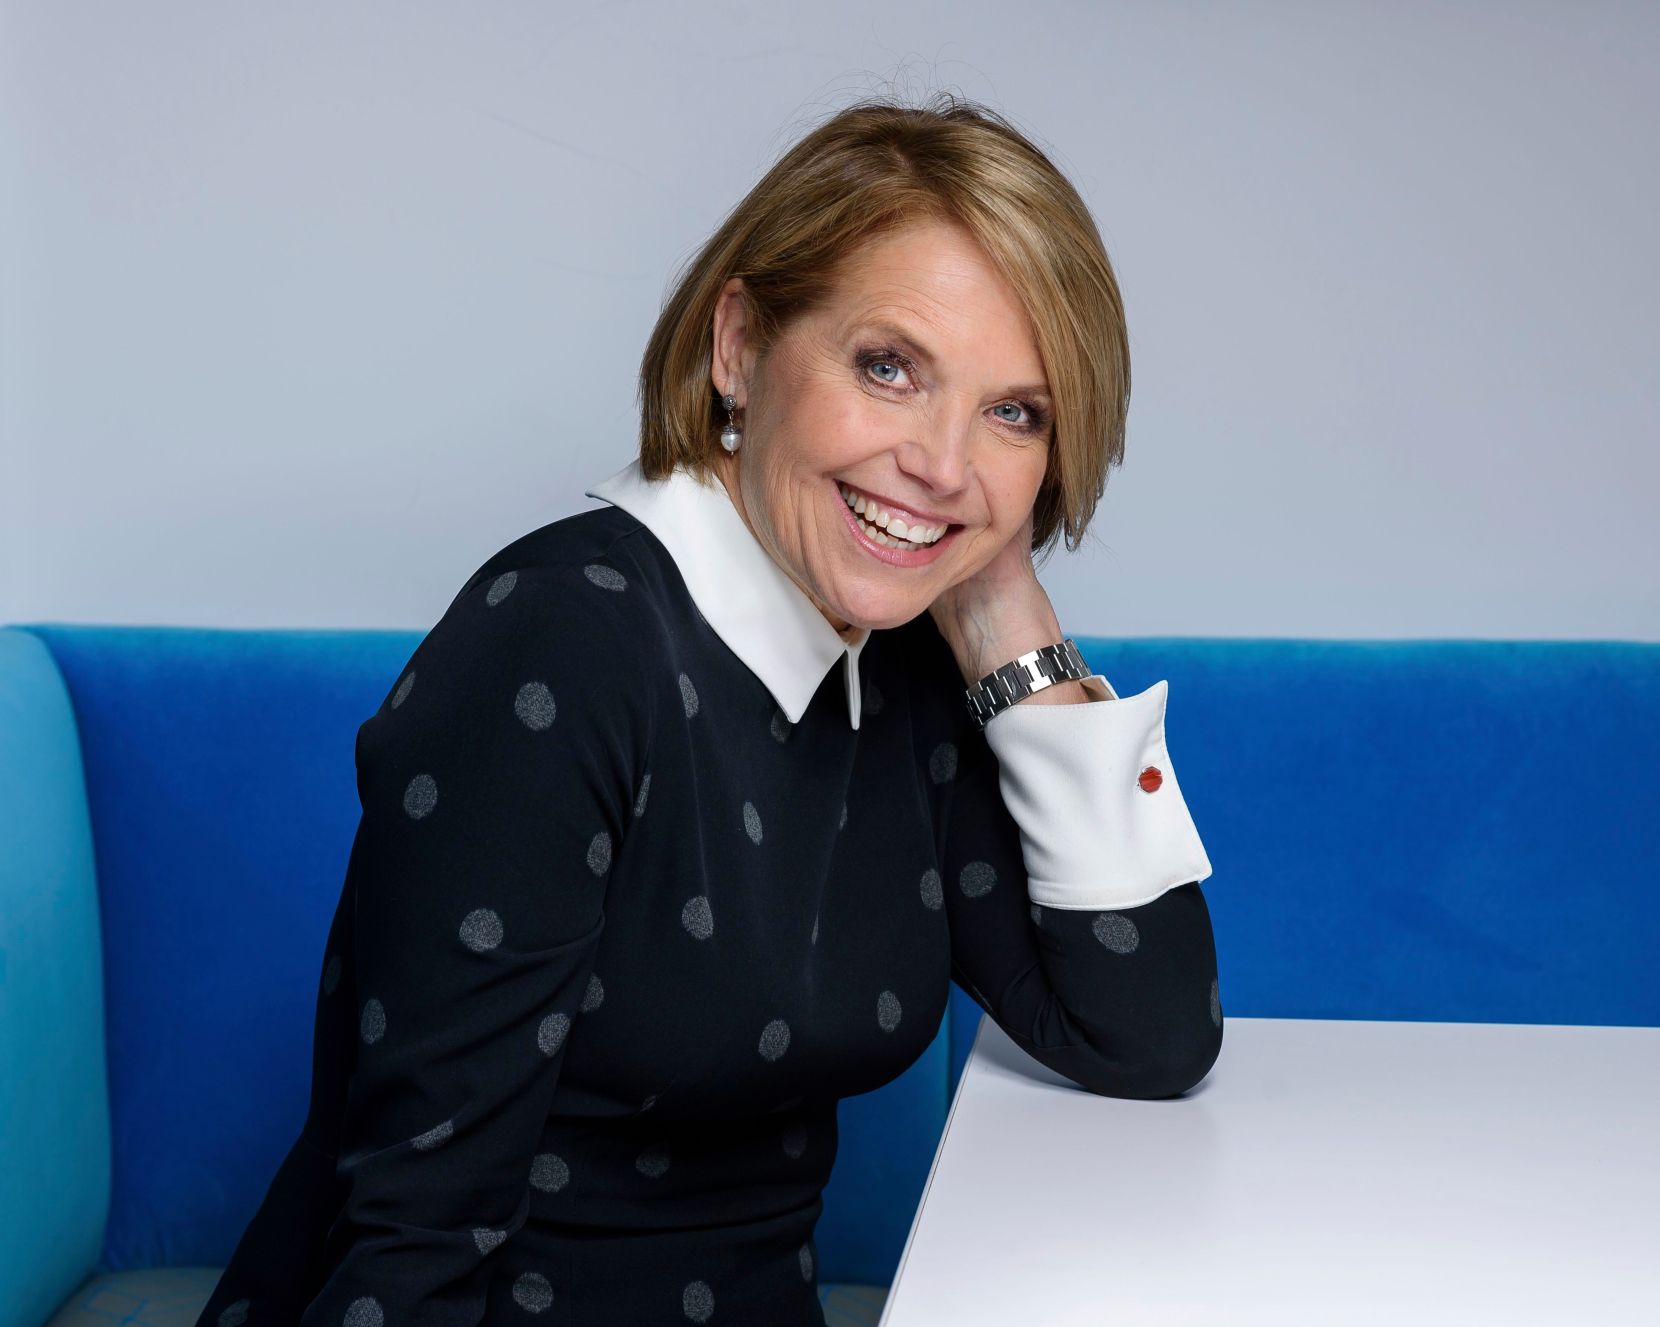 Katie Couric's Net Worth How Much Money Does She Make?